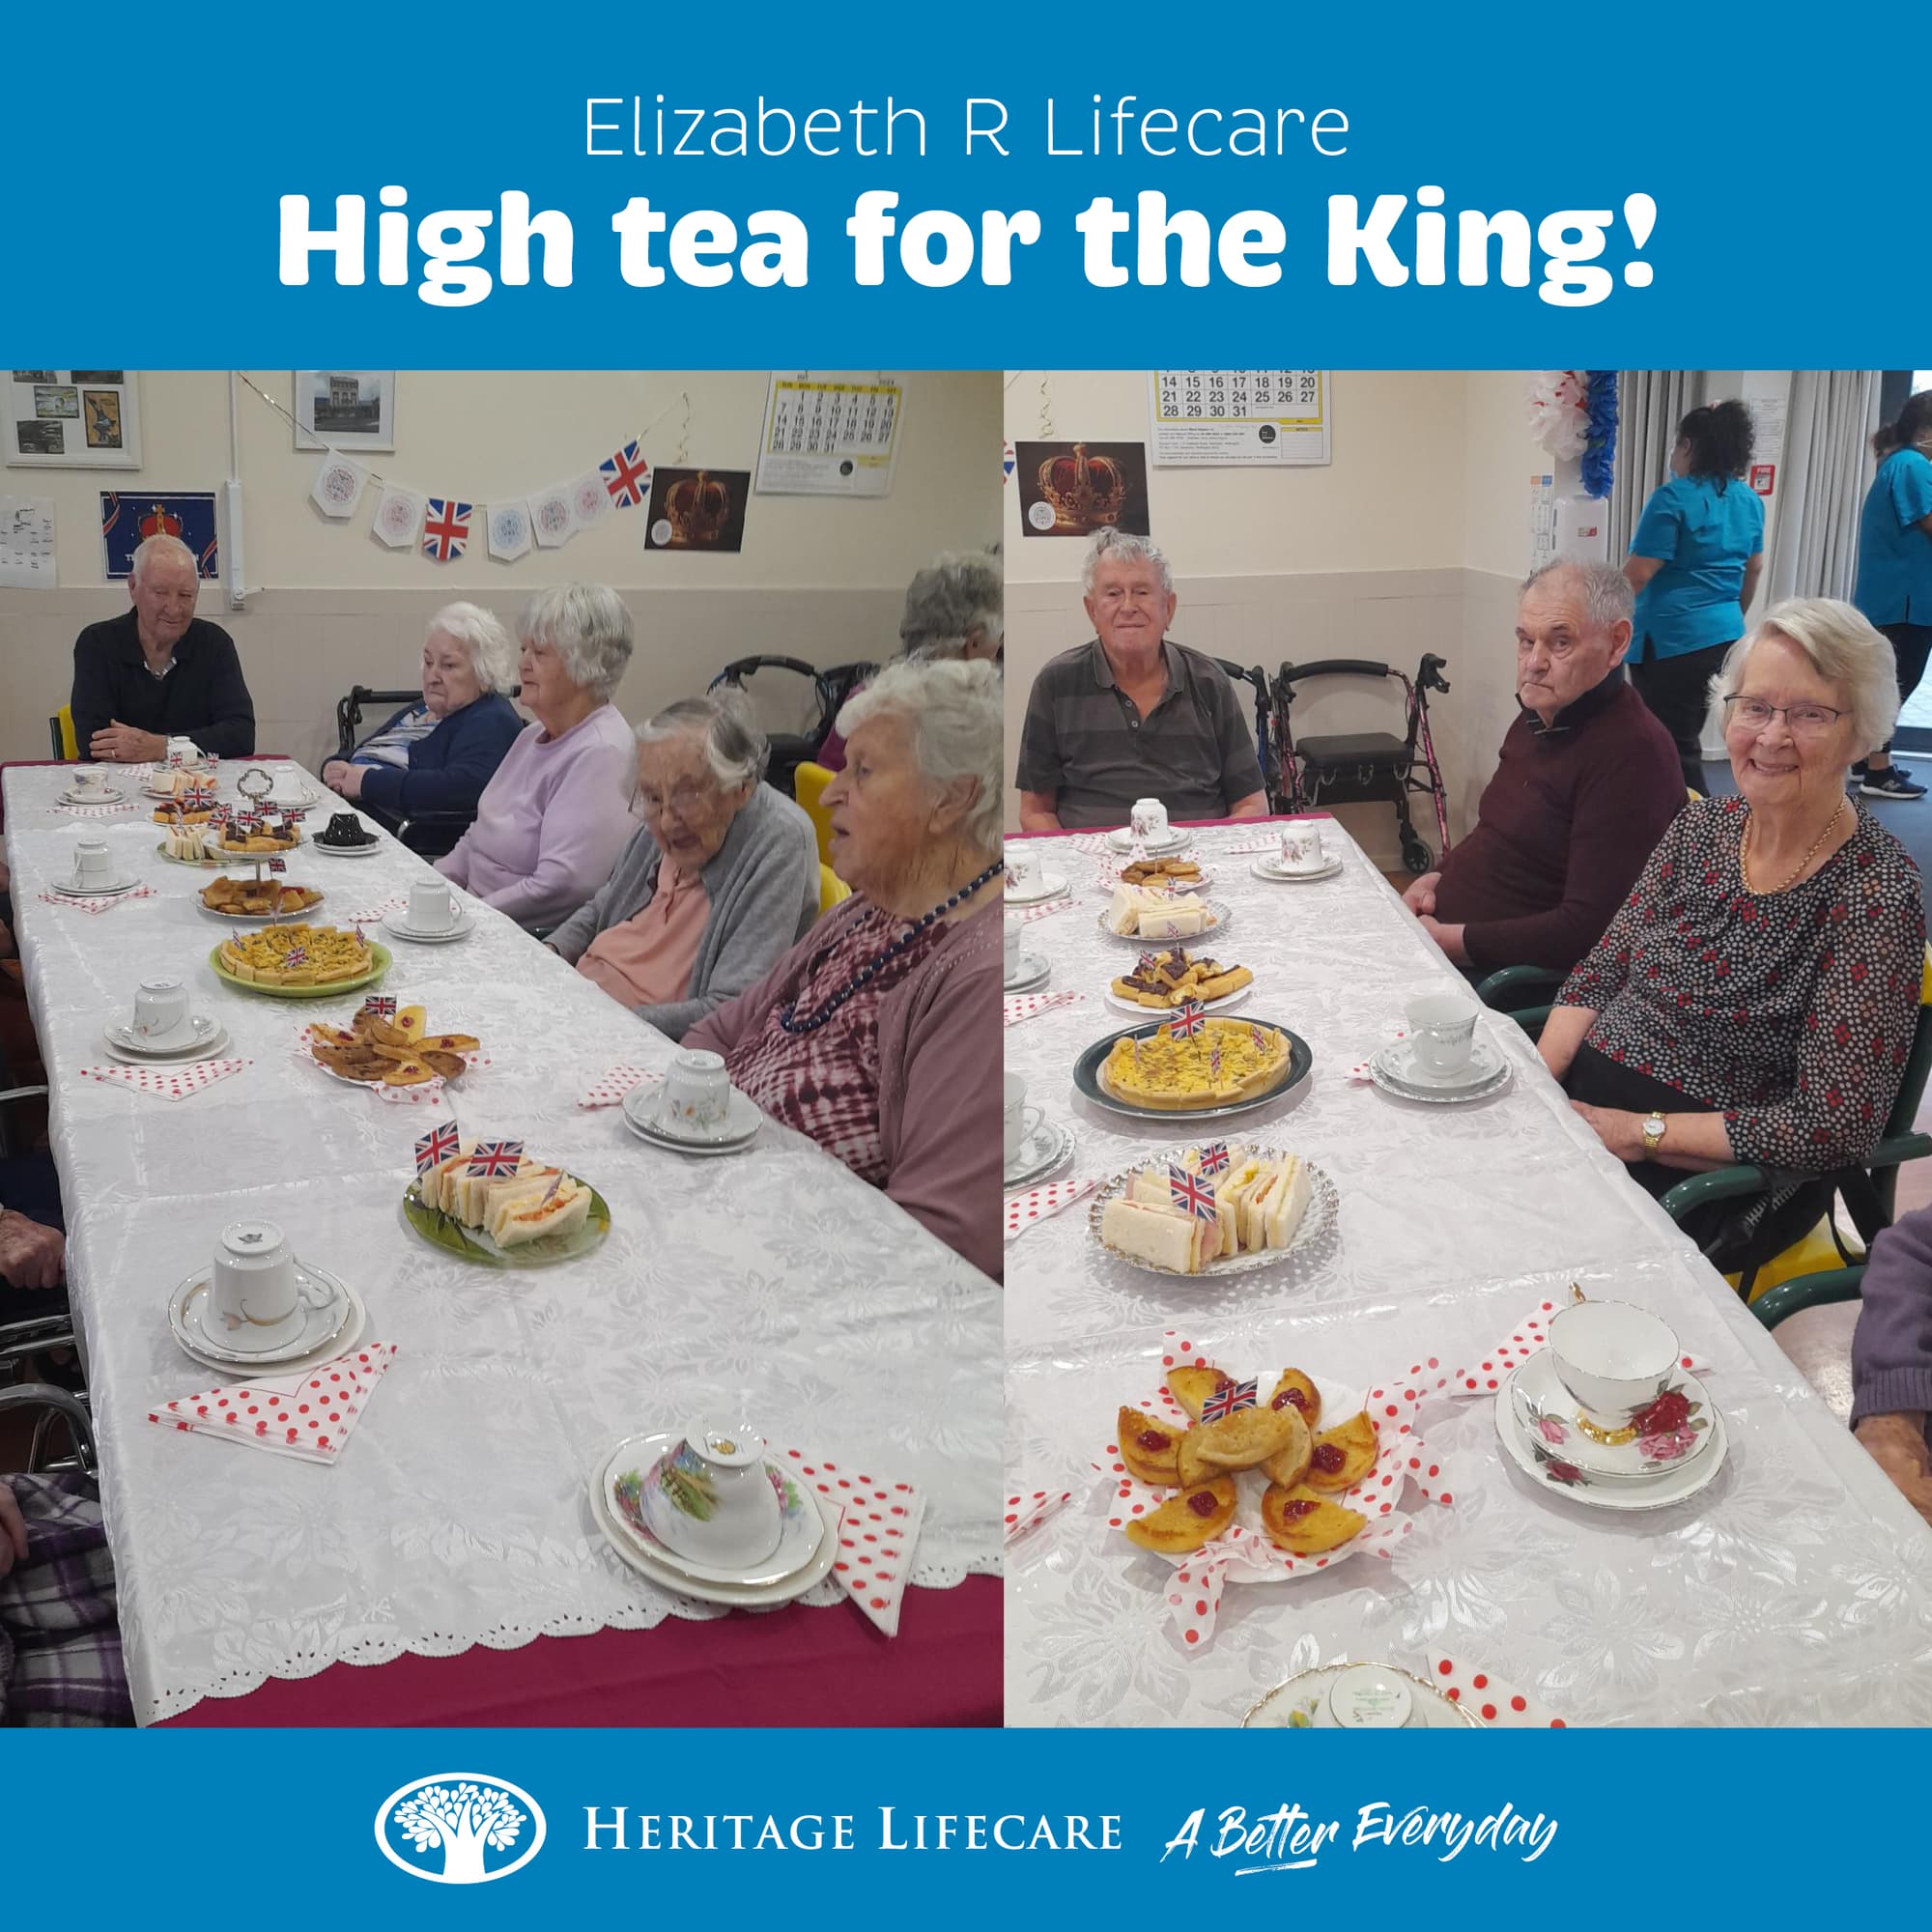 High tea for the King!